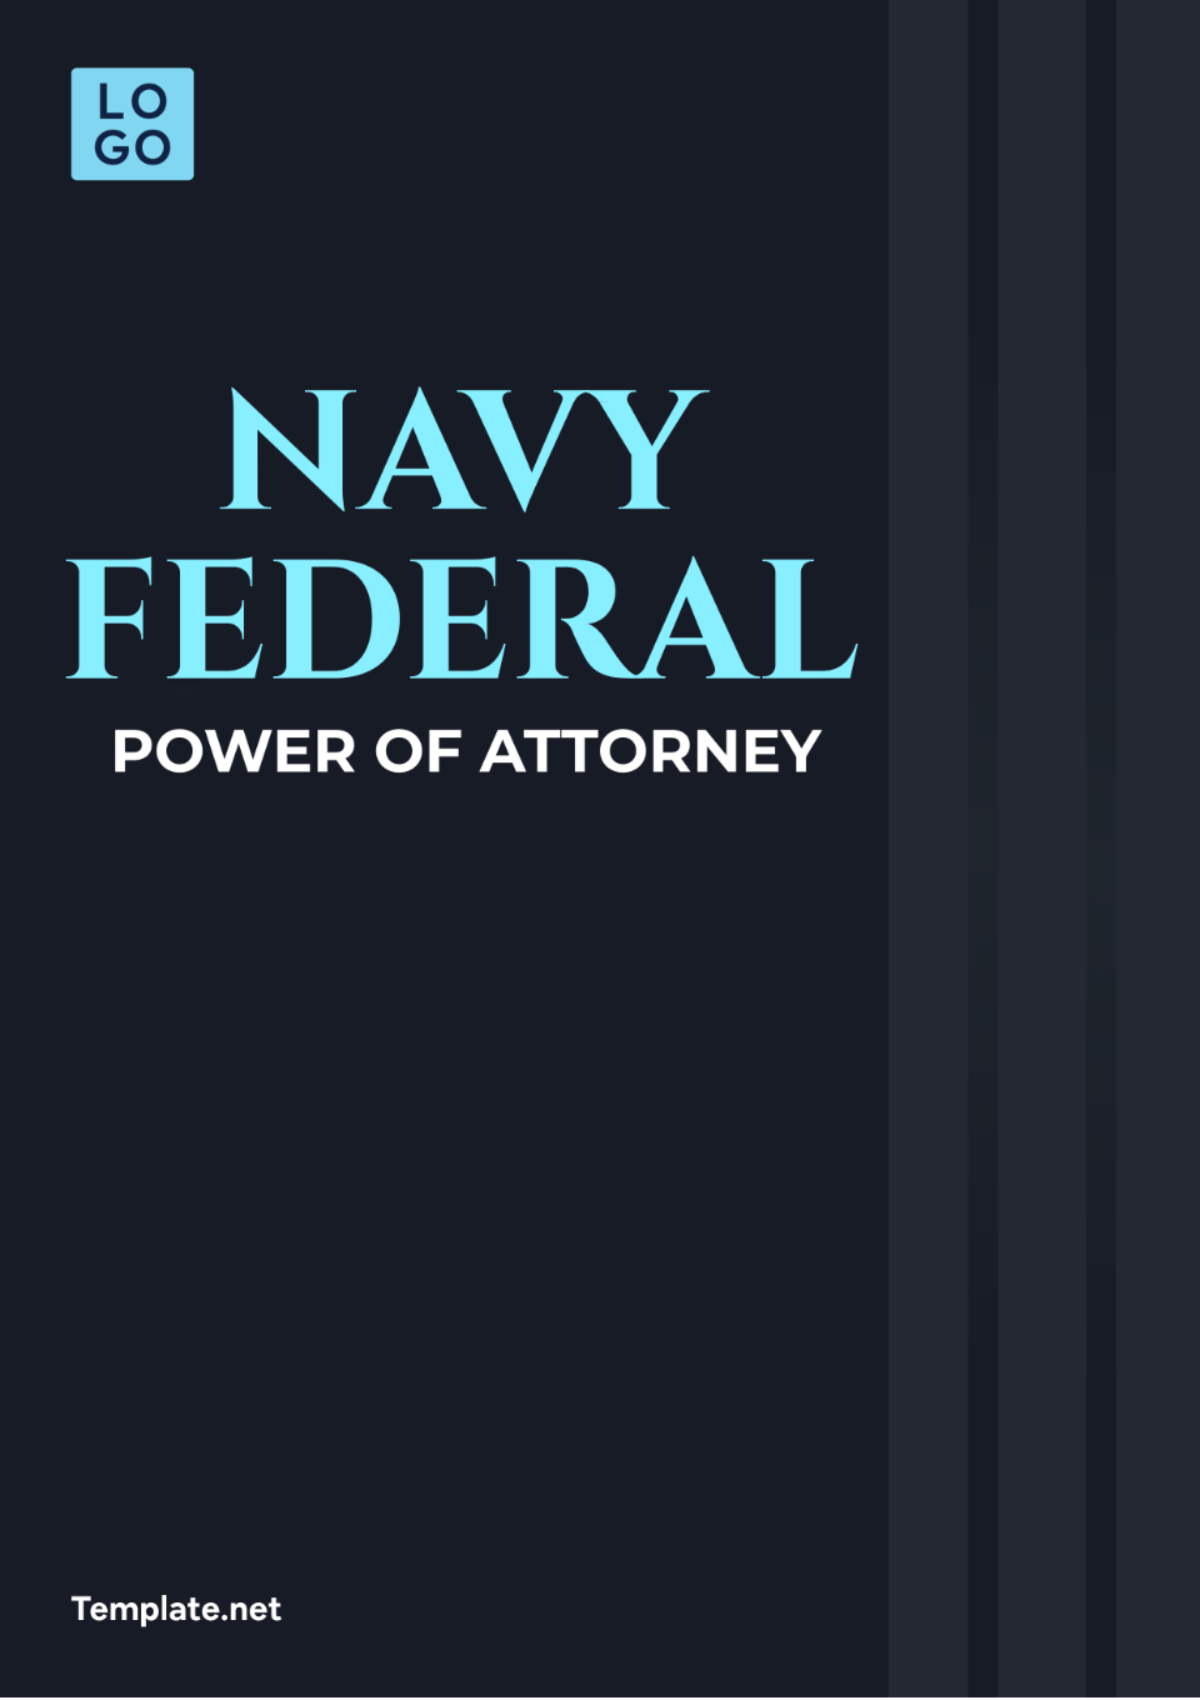 Navy Federal Power of Attorney Template